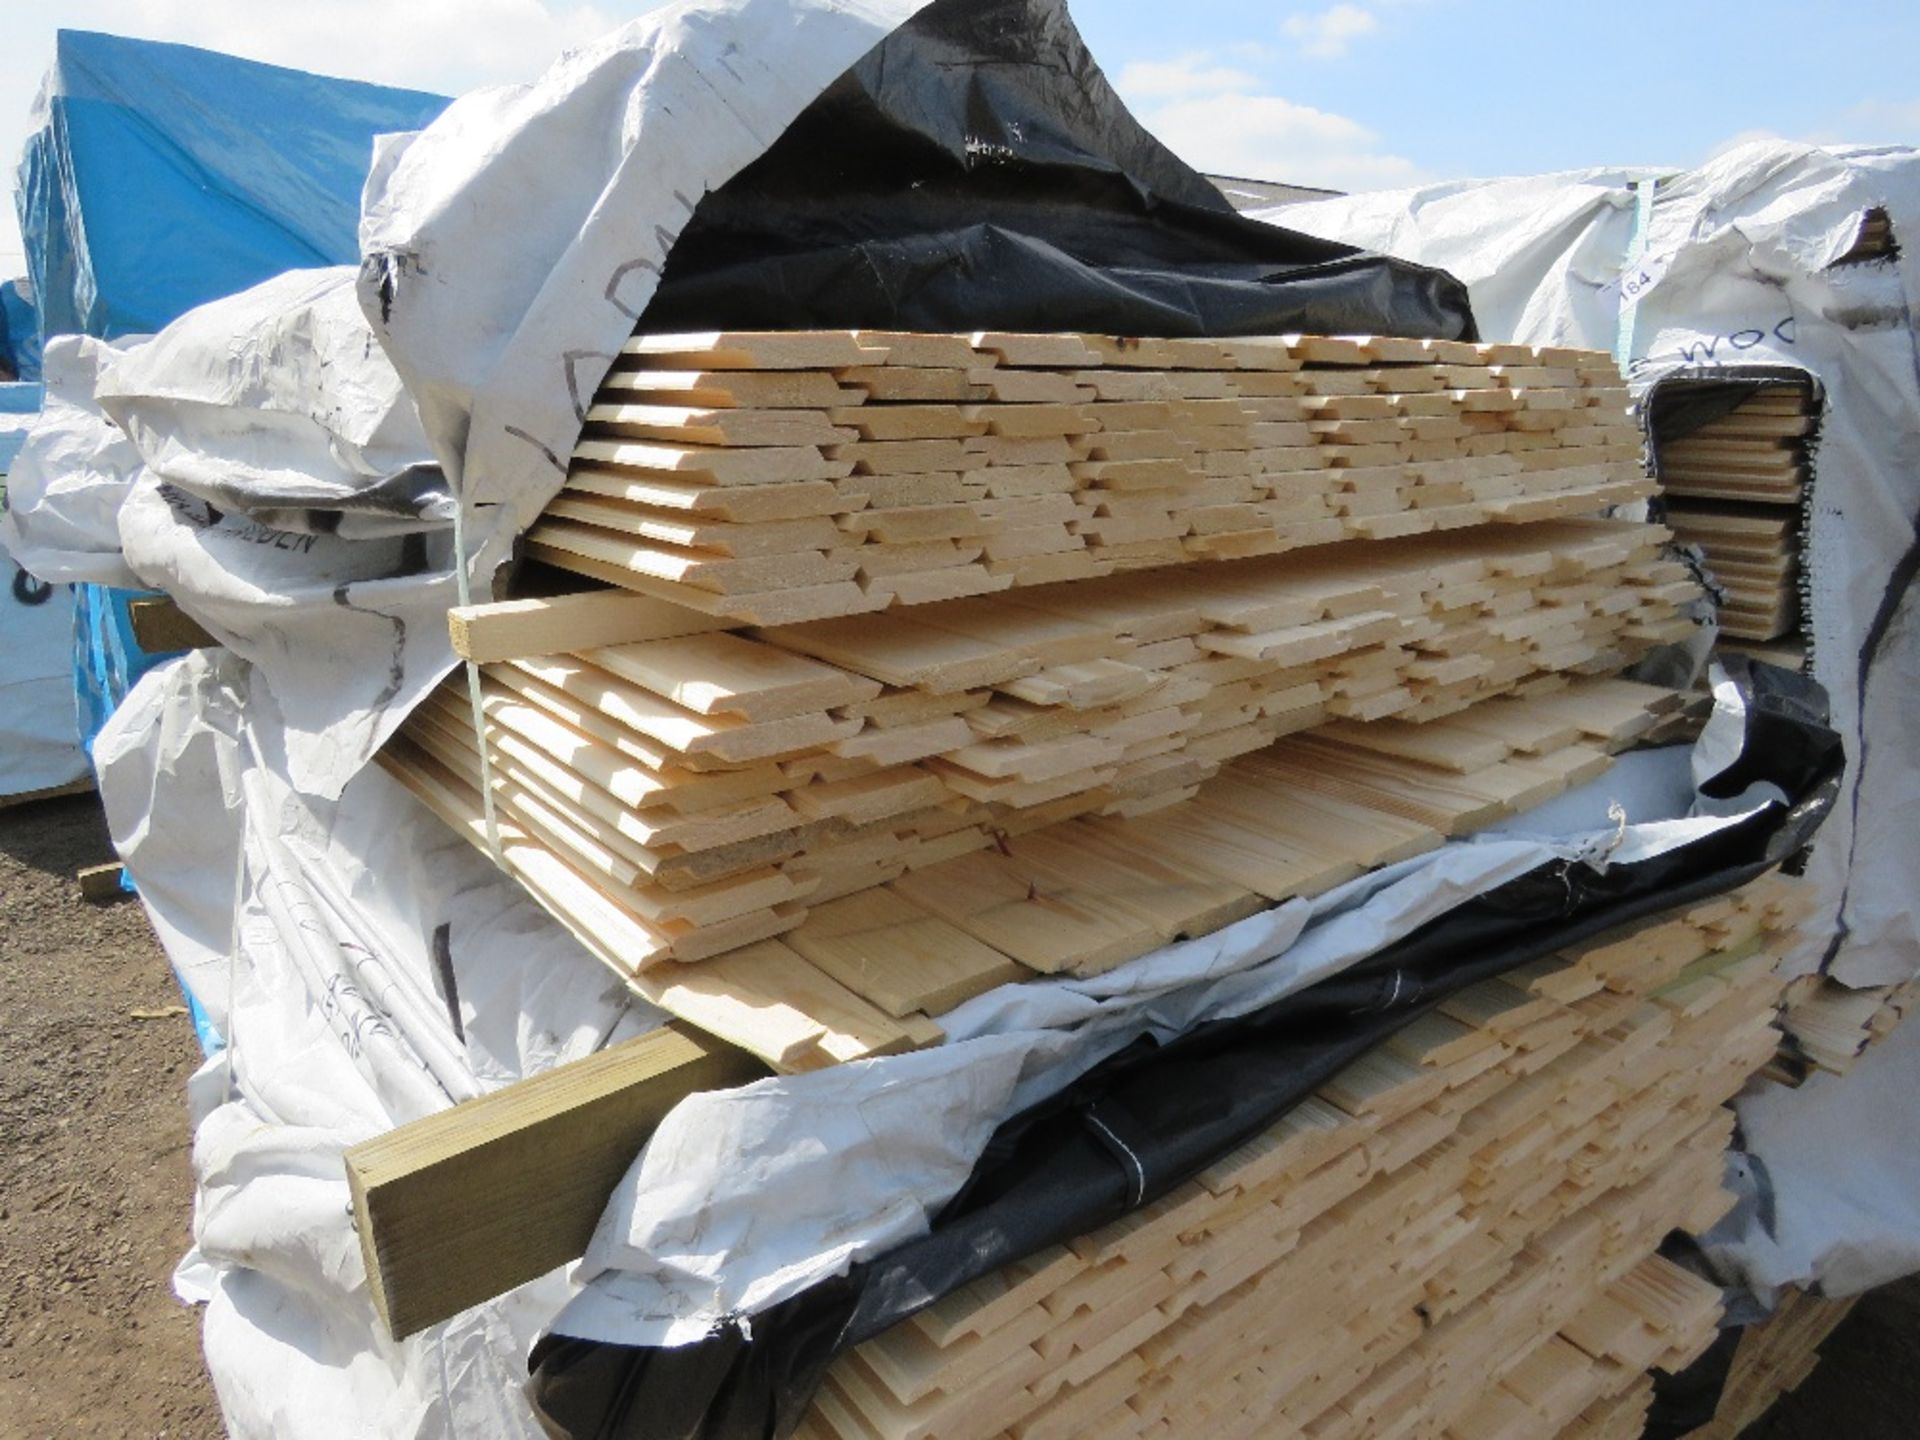 2 X PACKS OF UNTREATED SHIPLAP TYPE TIMBER CLADDING BOARDS: 1.73M X 100MM APPROX. - Image 2 of 6